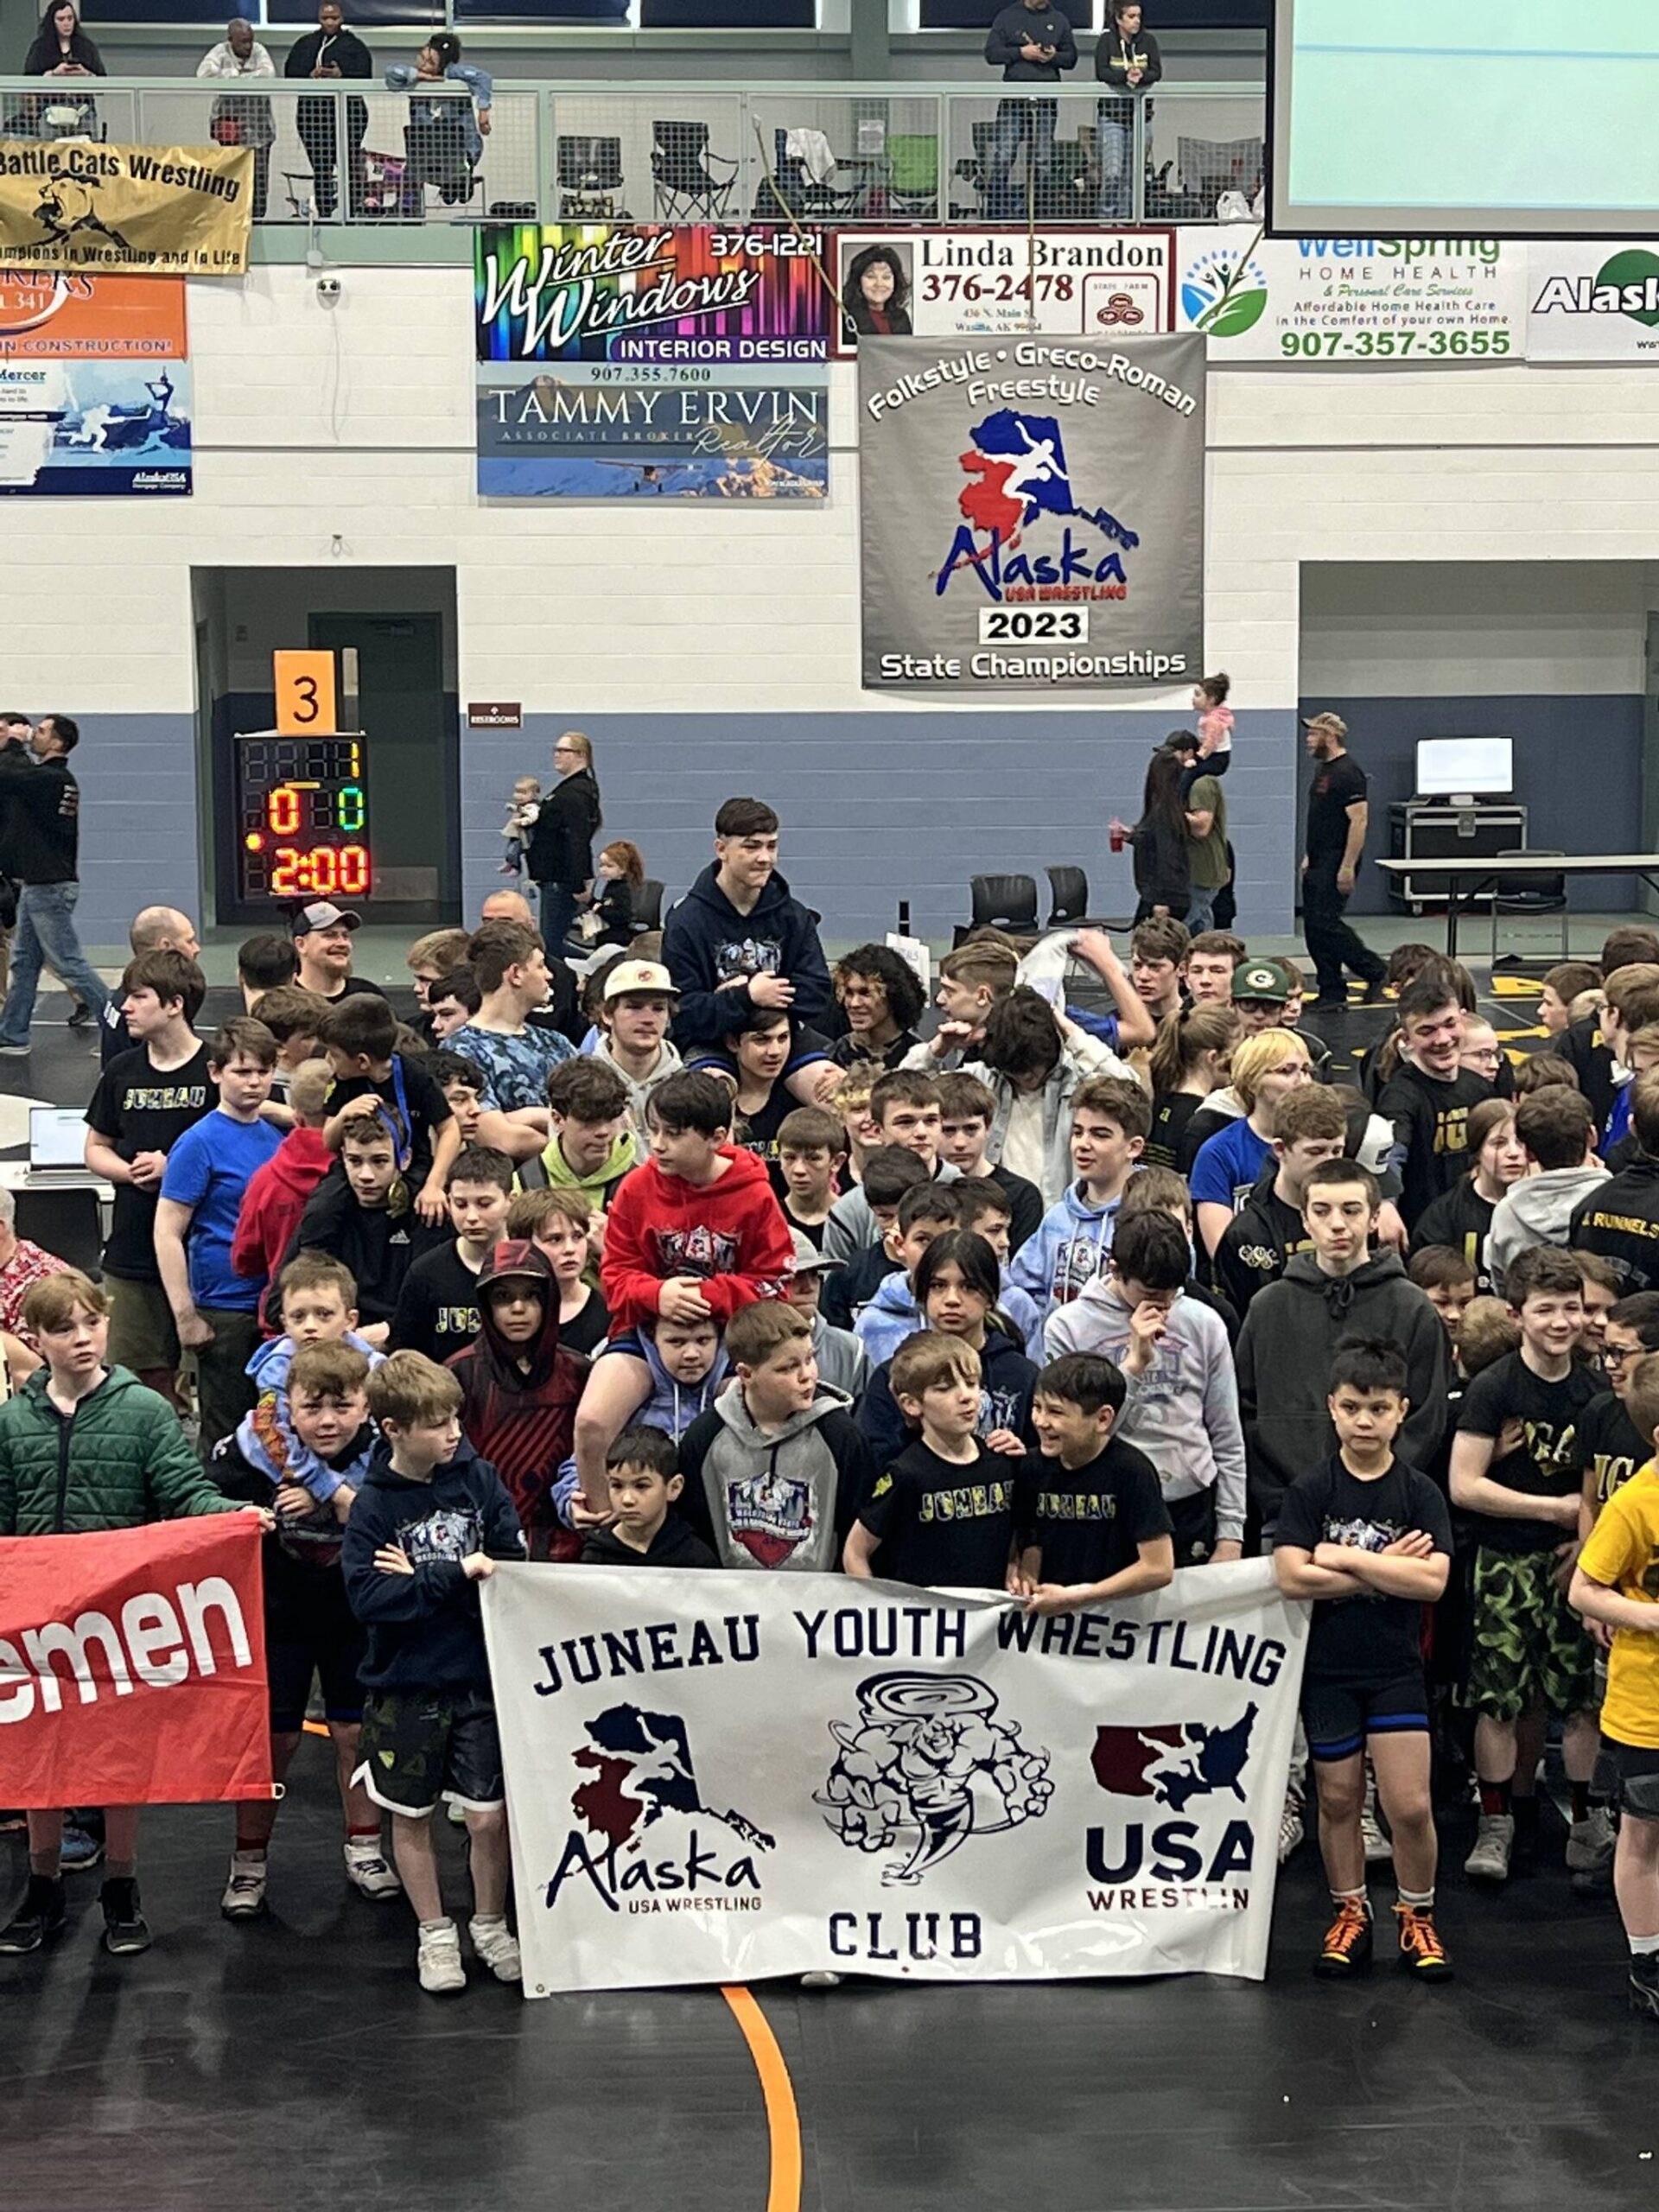 A group of JYWC Tornadoes get ready before the opening ceremony at the USA Wrestling Alaska State Championships at the Menard Center in Wasilla from May 3-7. (Courtesy Photo / Mel Hastings)